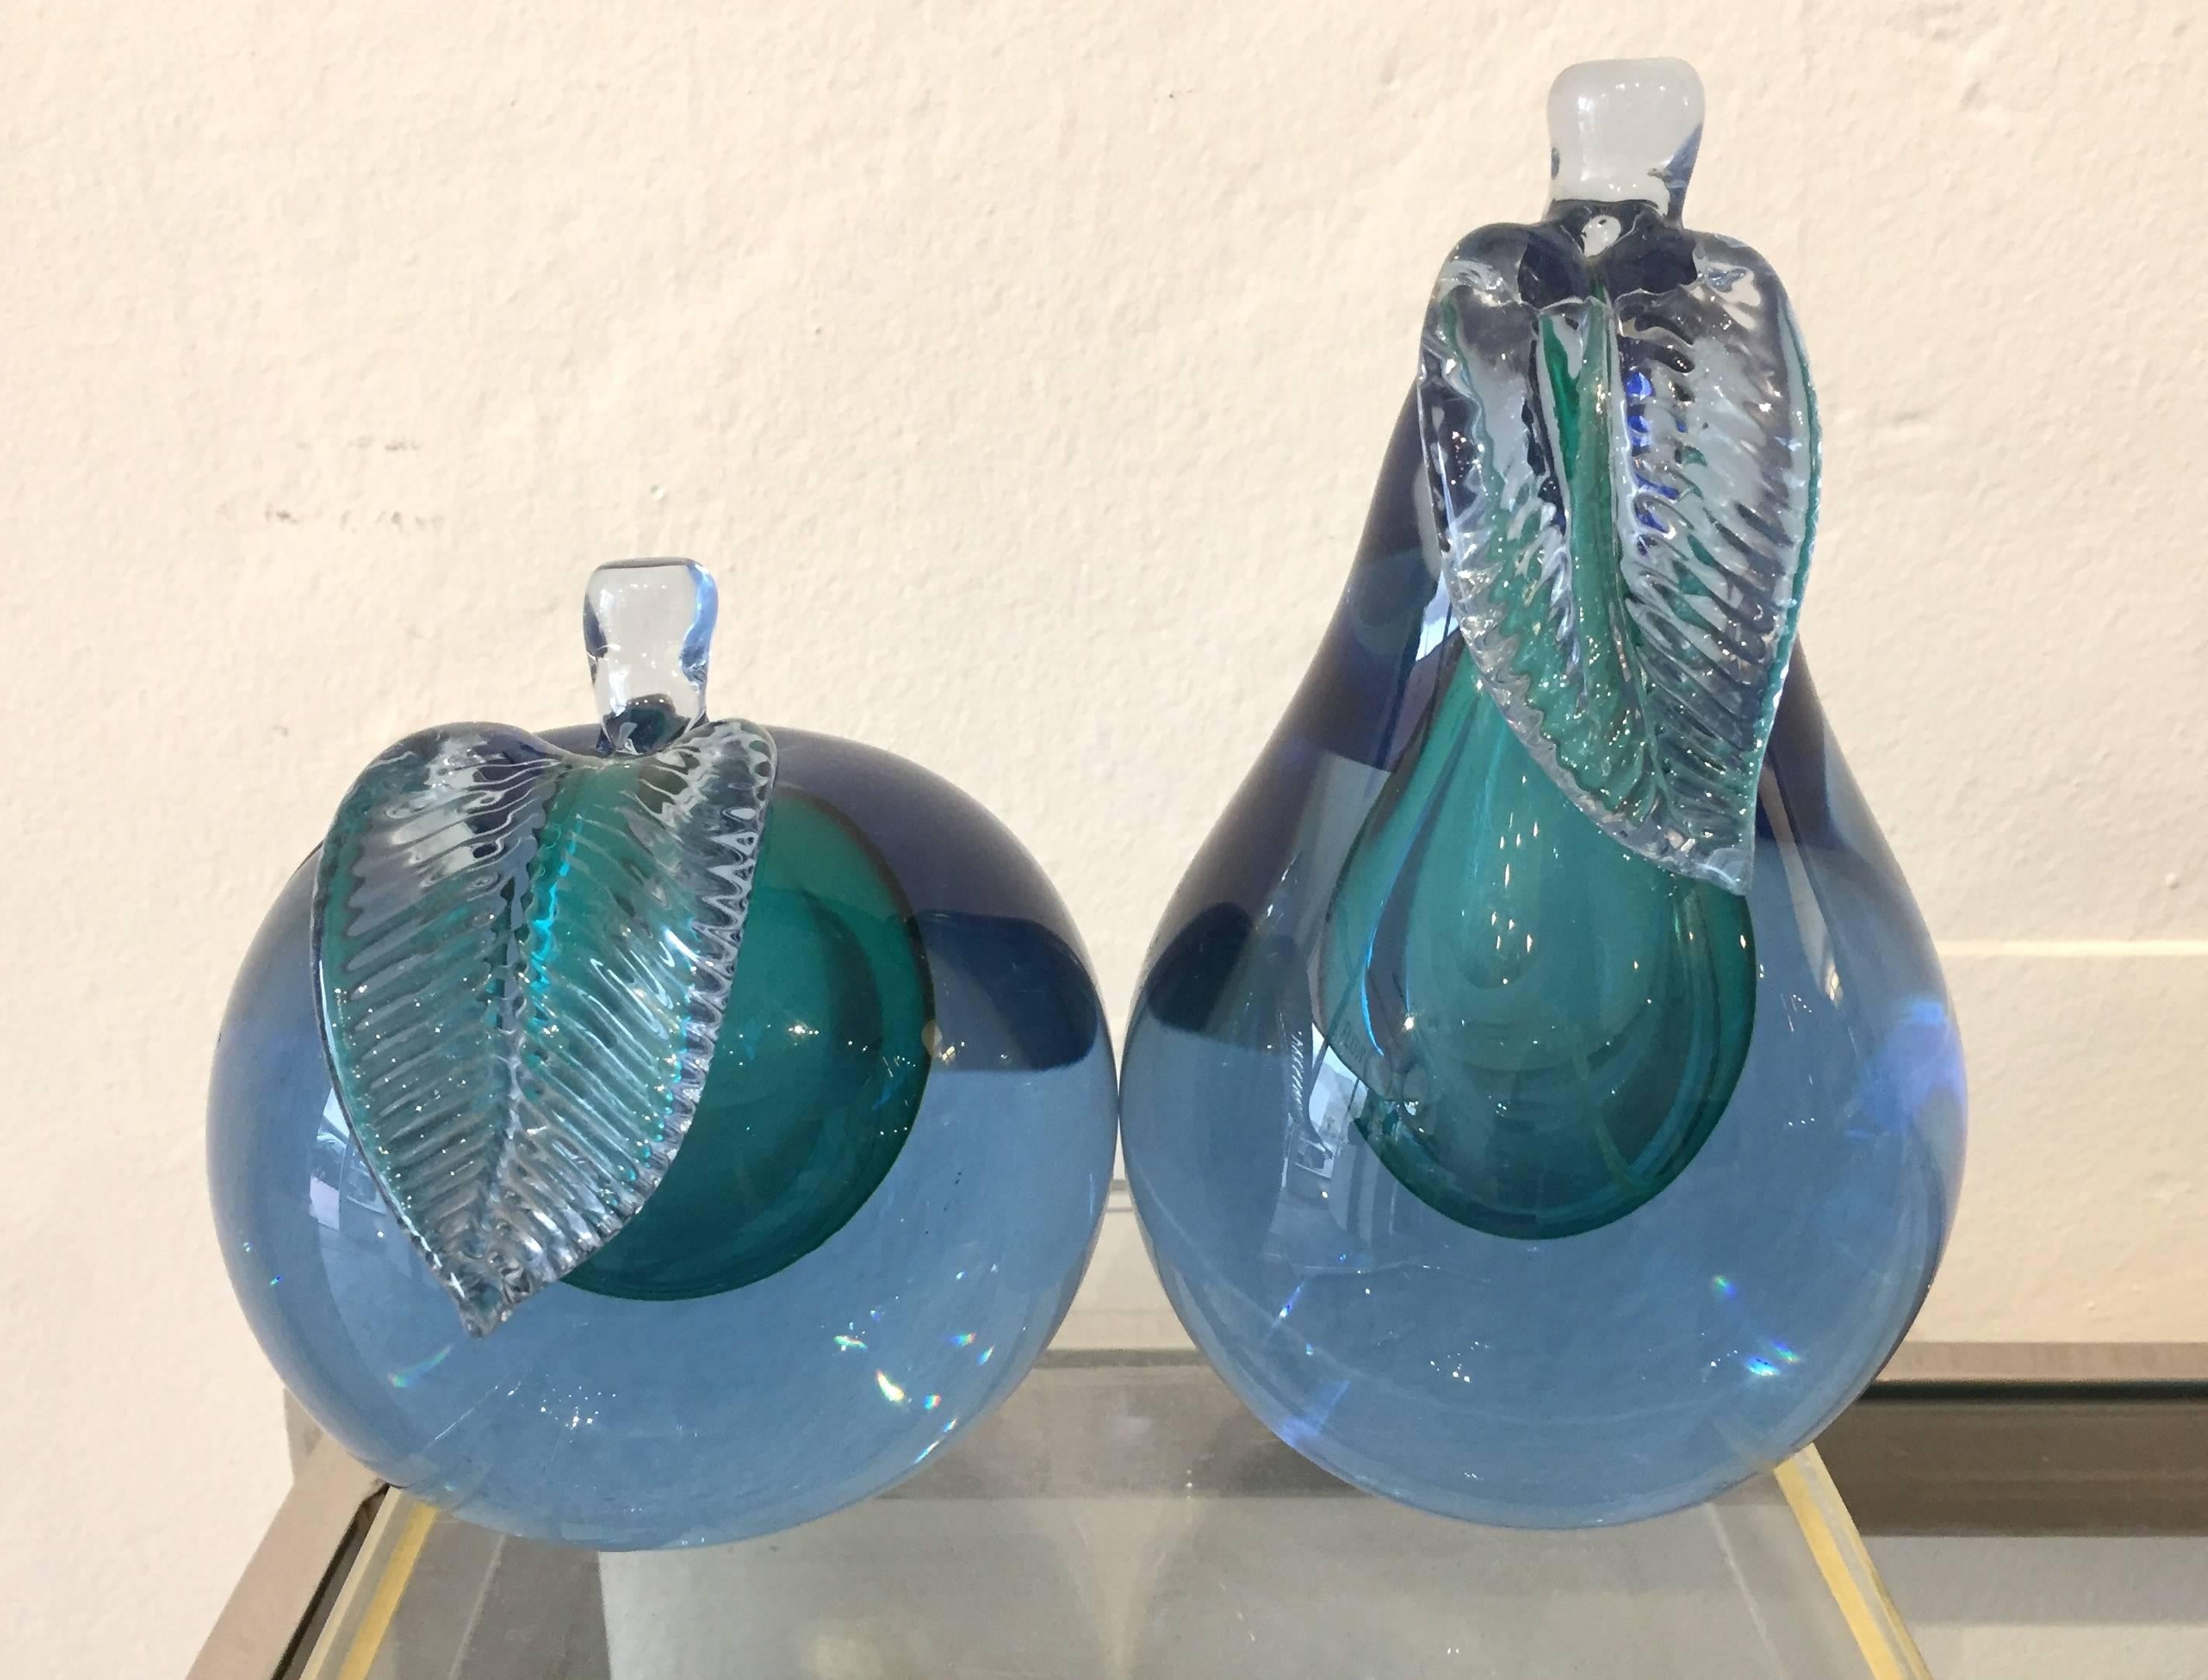 A beautiful apple and pear with blue encapsulating the green handblown glass. Measures: The pear is 7